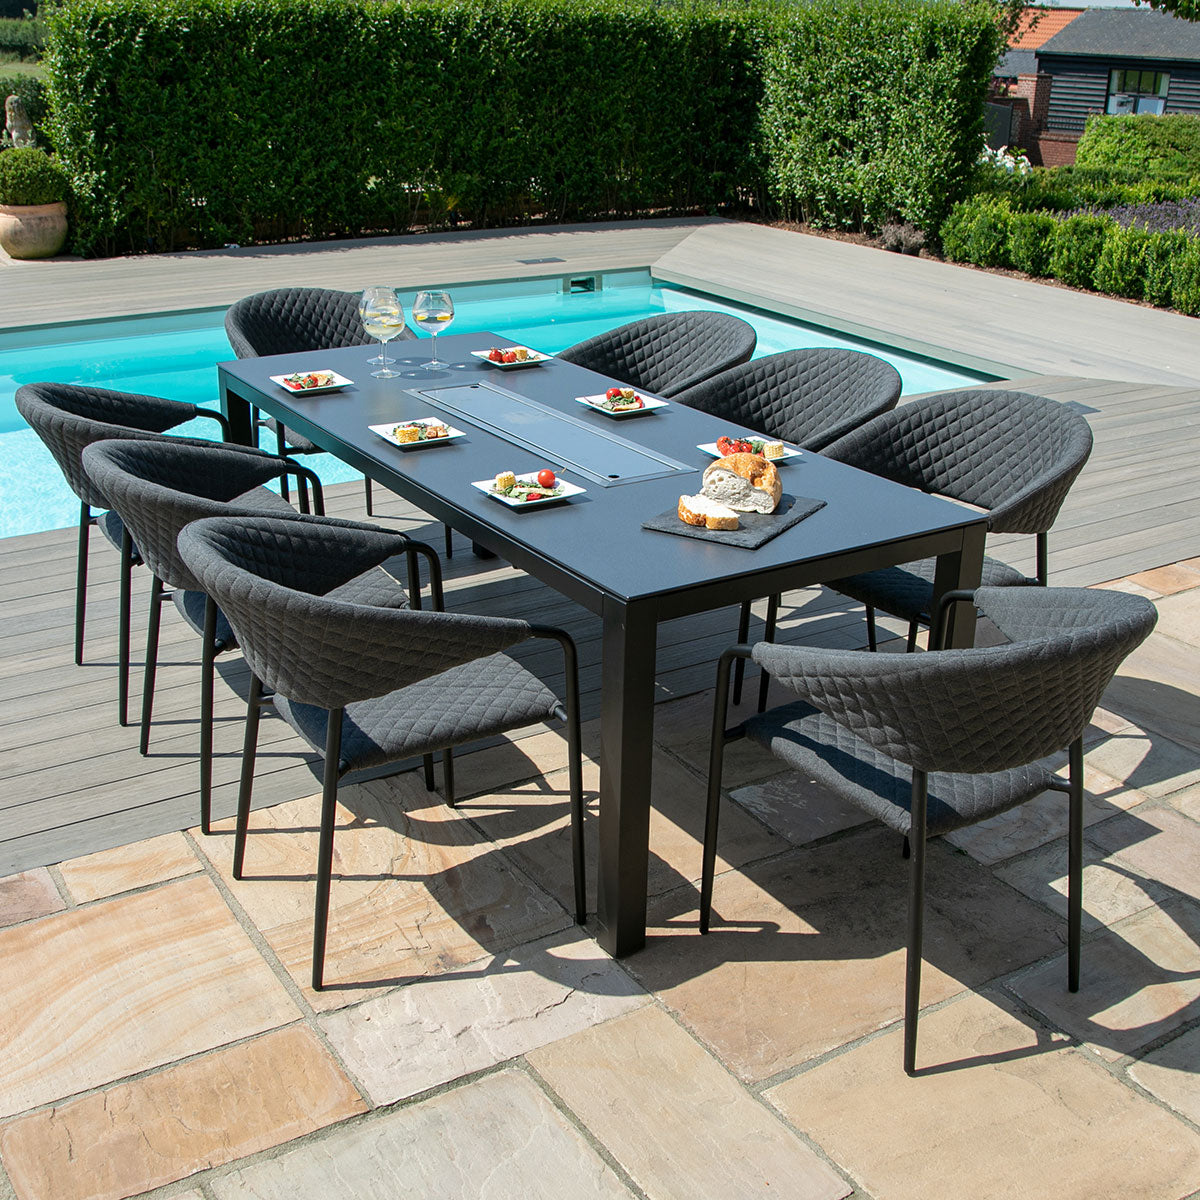 Maze - Outdoor Fabric Pebble 8 Seat Rectangular Dining Set with Fire Pit Table - Charcoal